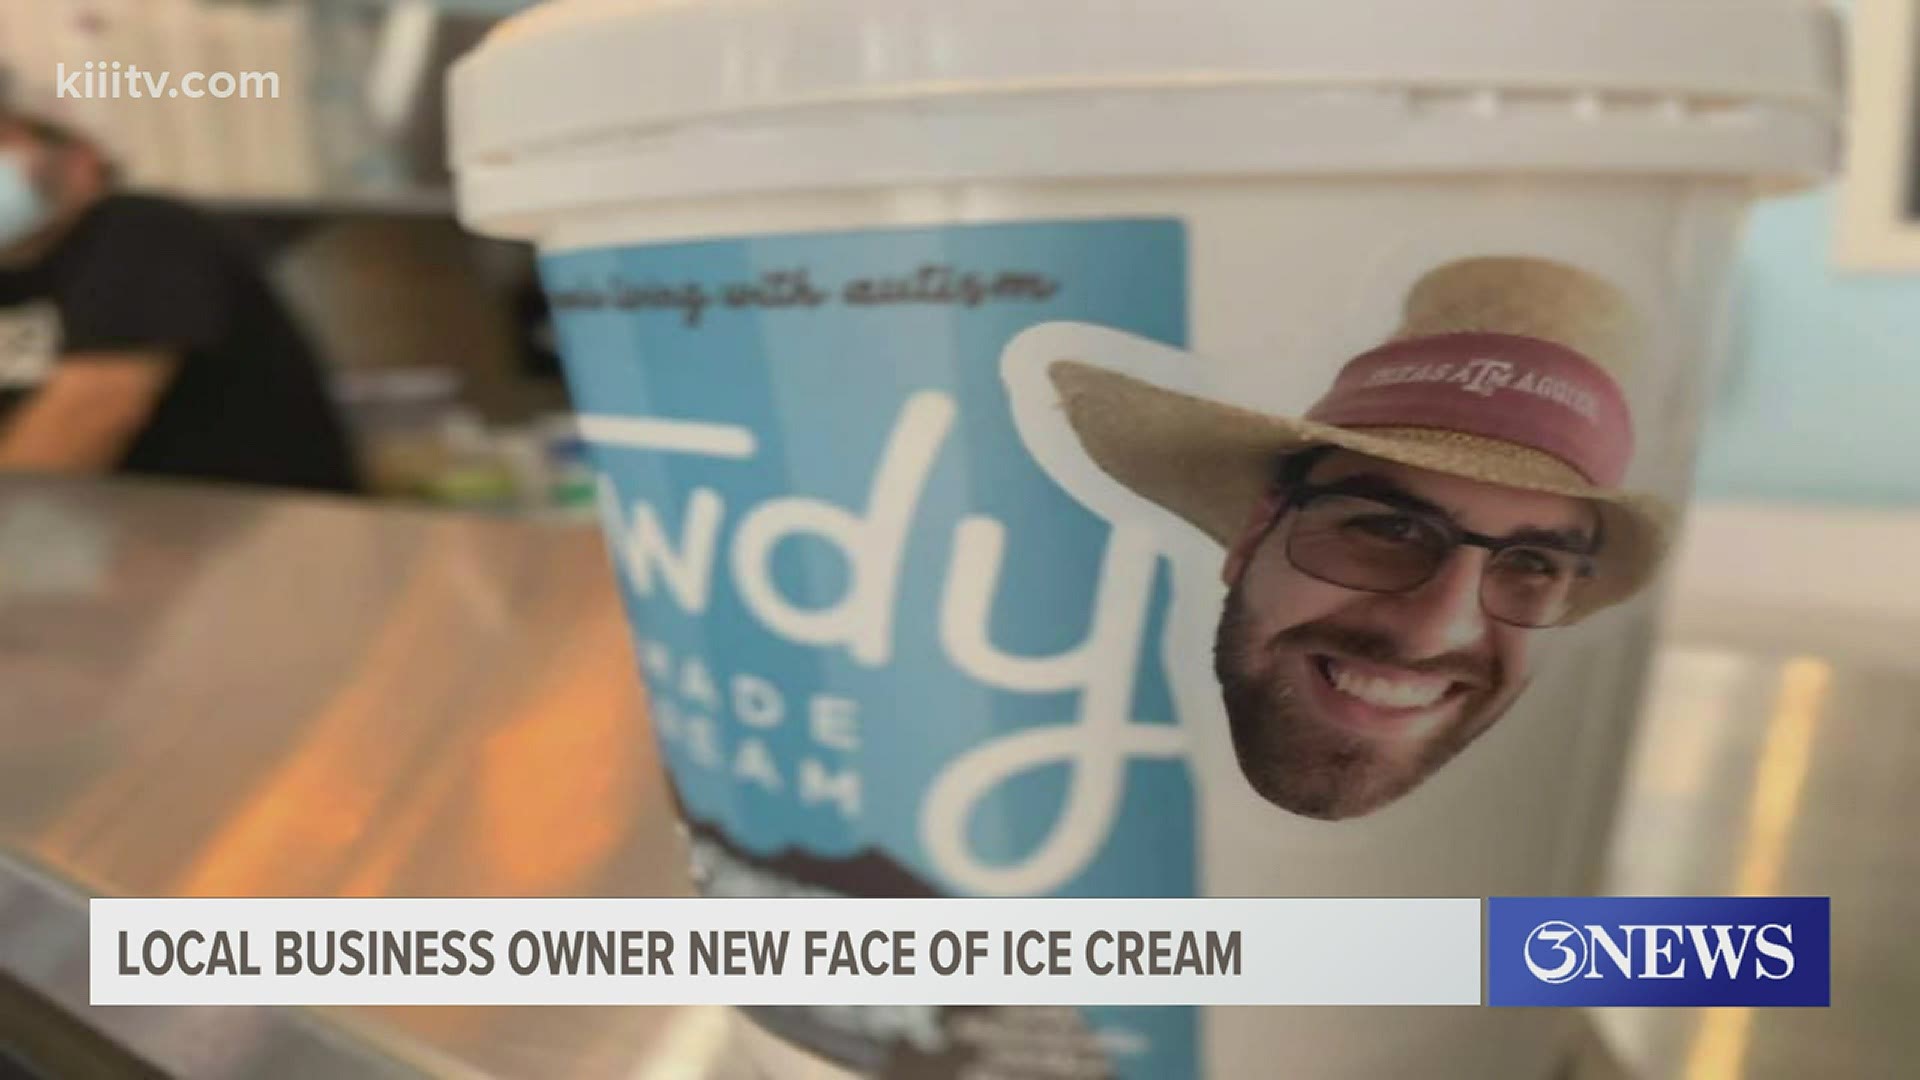 The specialty ice cream hits store shelves January 2021.